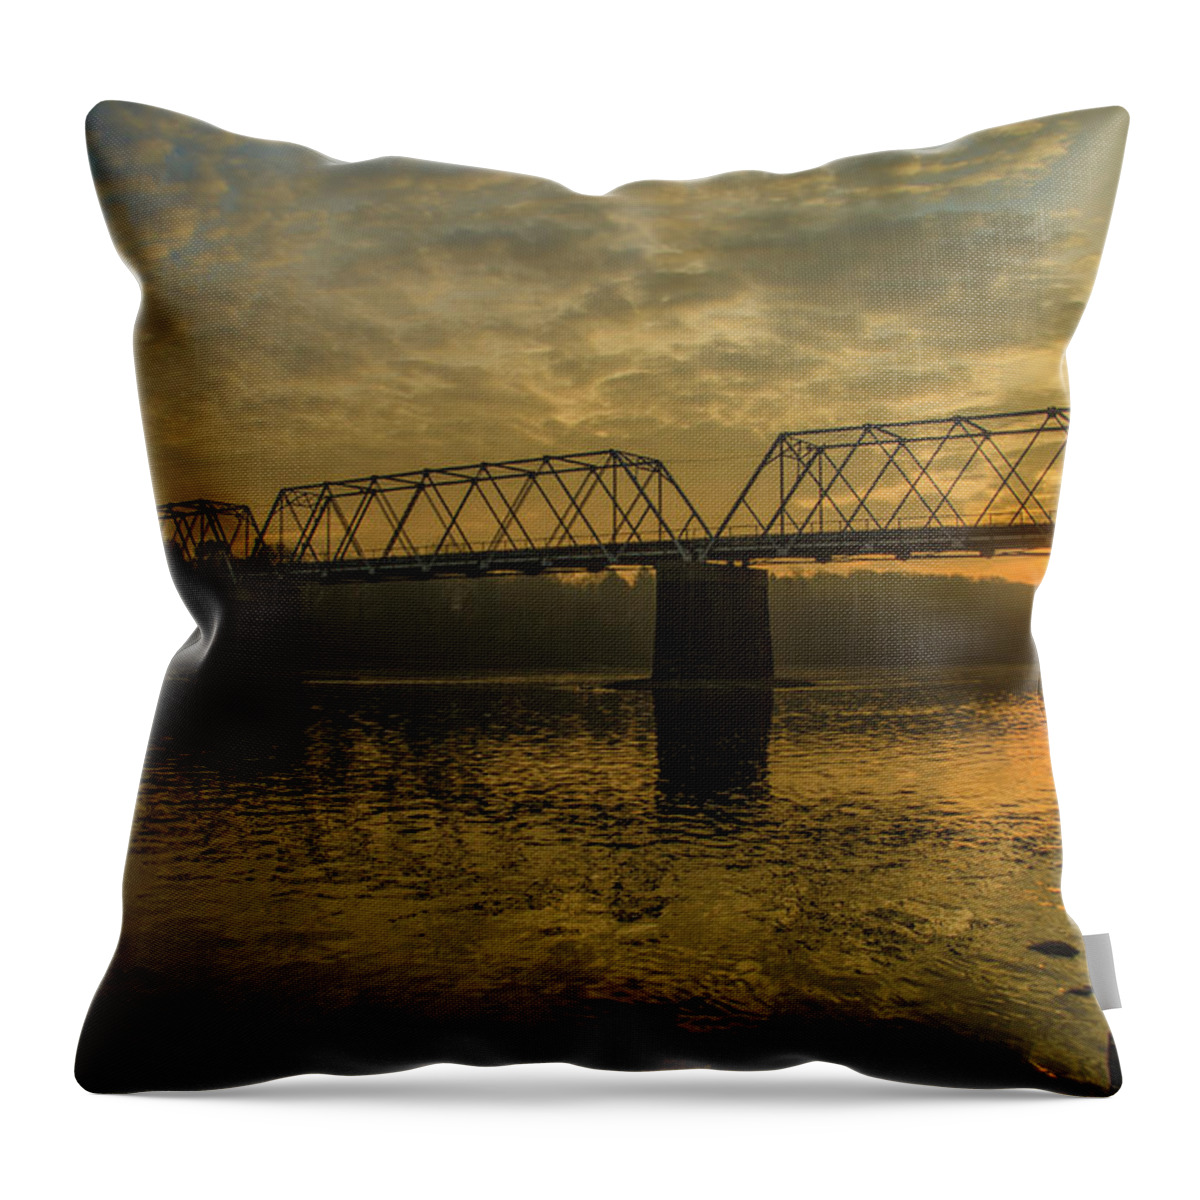 Washingtons Throw Pillow featuring the photograph Washingtons Crossing at Dawn by Bill Cannon